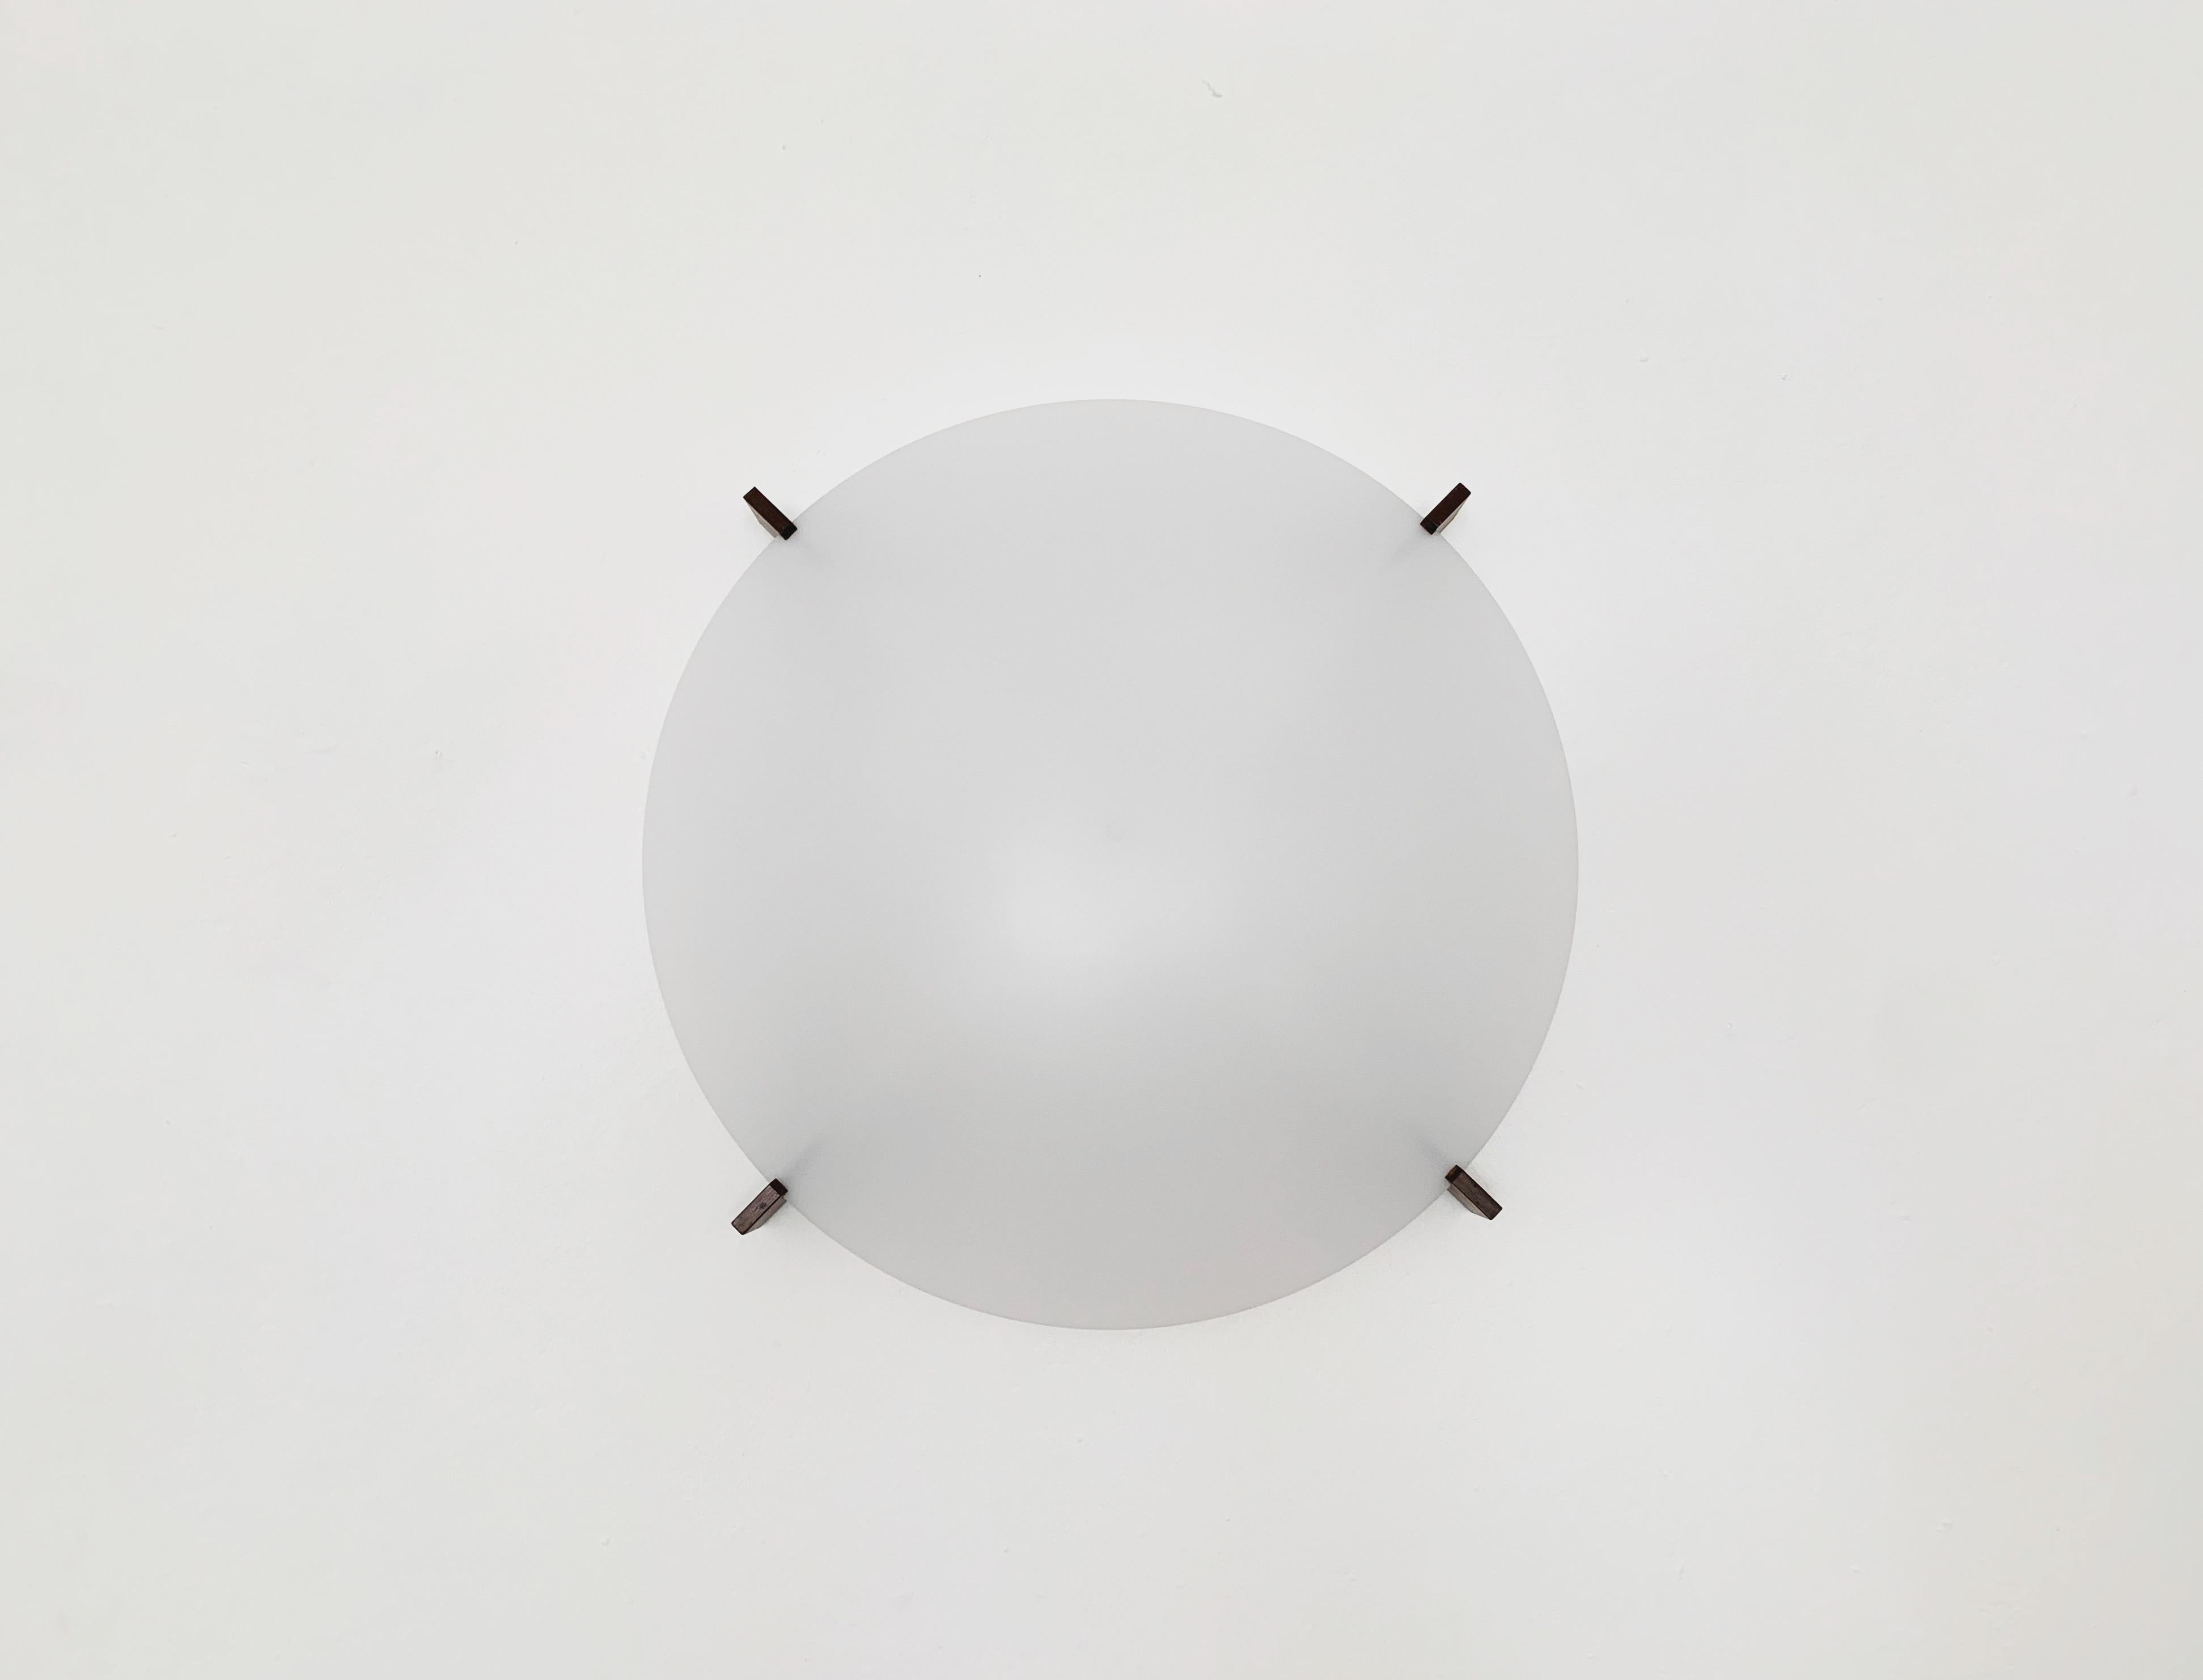 Extremely rare and beautiful Swedish wall lamp or ceiling lamp from the 1960s.
Great and exceptionally minimalist design.
The plastic lampshade spreads a warm and pleasant light.
A very beautiful star-shaped play of light is created on the